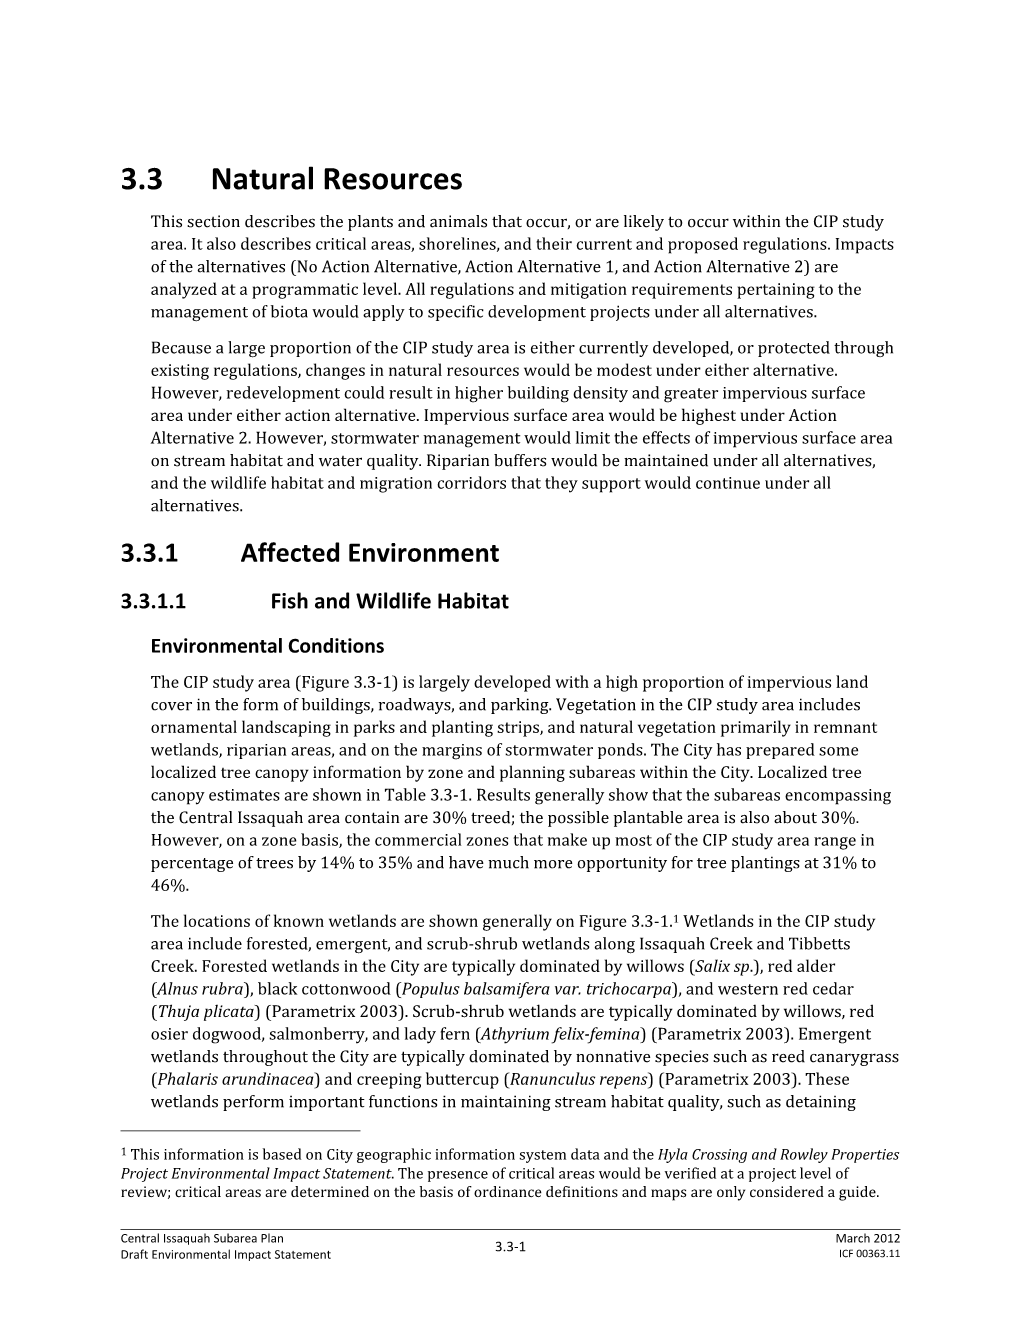 3.3 Natural Resources This Section Describes the Plants and Animals That Occur, Or Are Likely to Occur Within the CIP Study Area